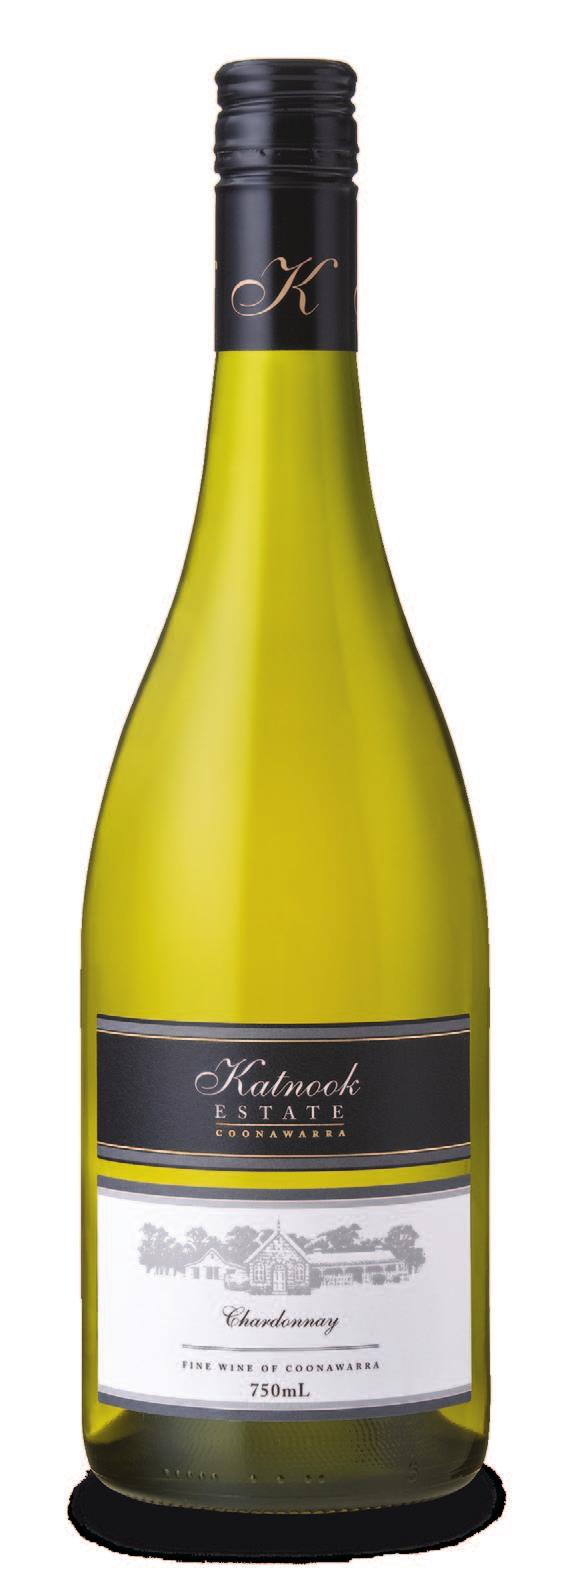 Katnook Estate Chardonnay 2008 The Katnook Estate range of premium quality, single varietal wines are an expression of the classic and unique characteristics of the Coonawarra wine region.